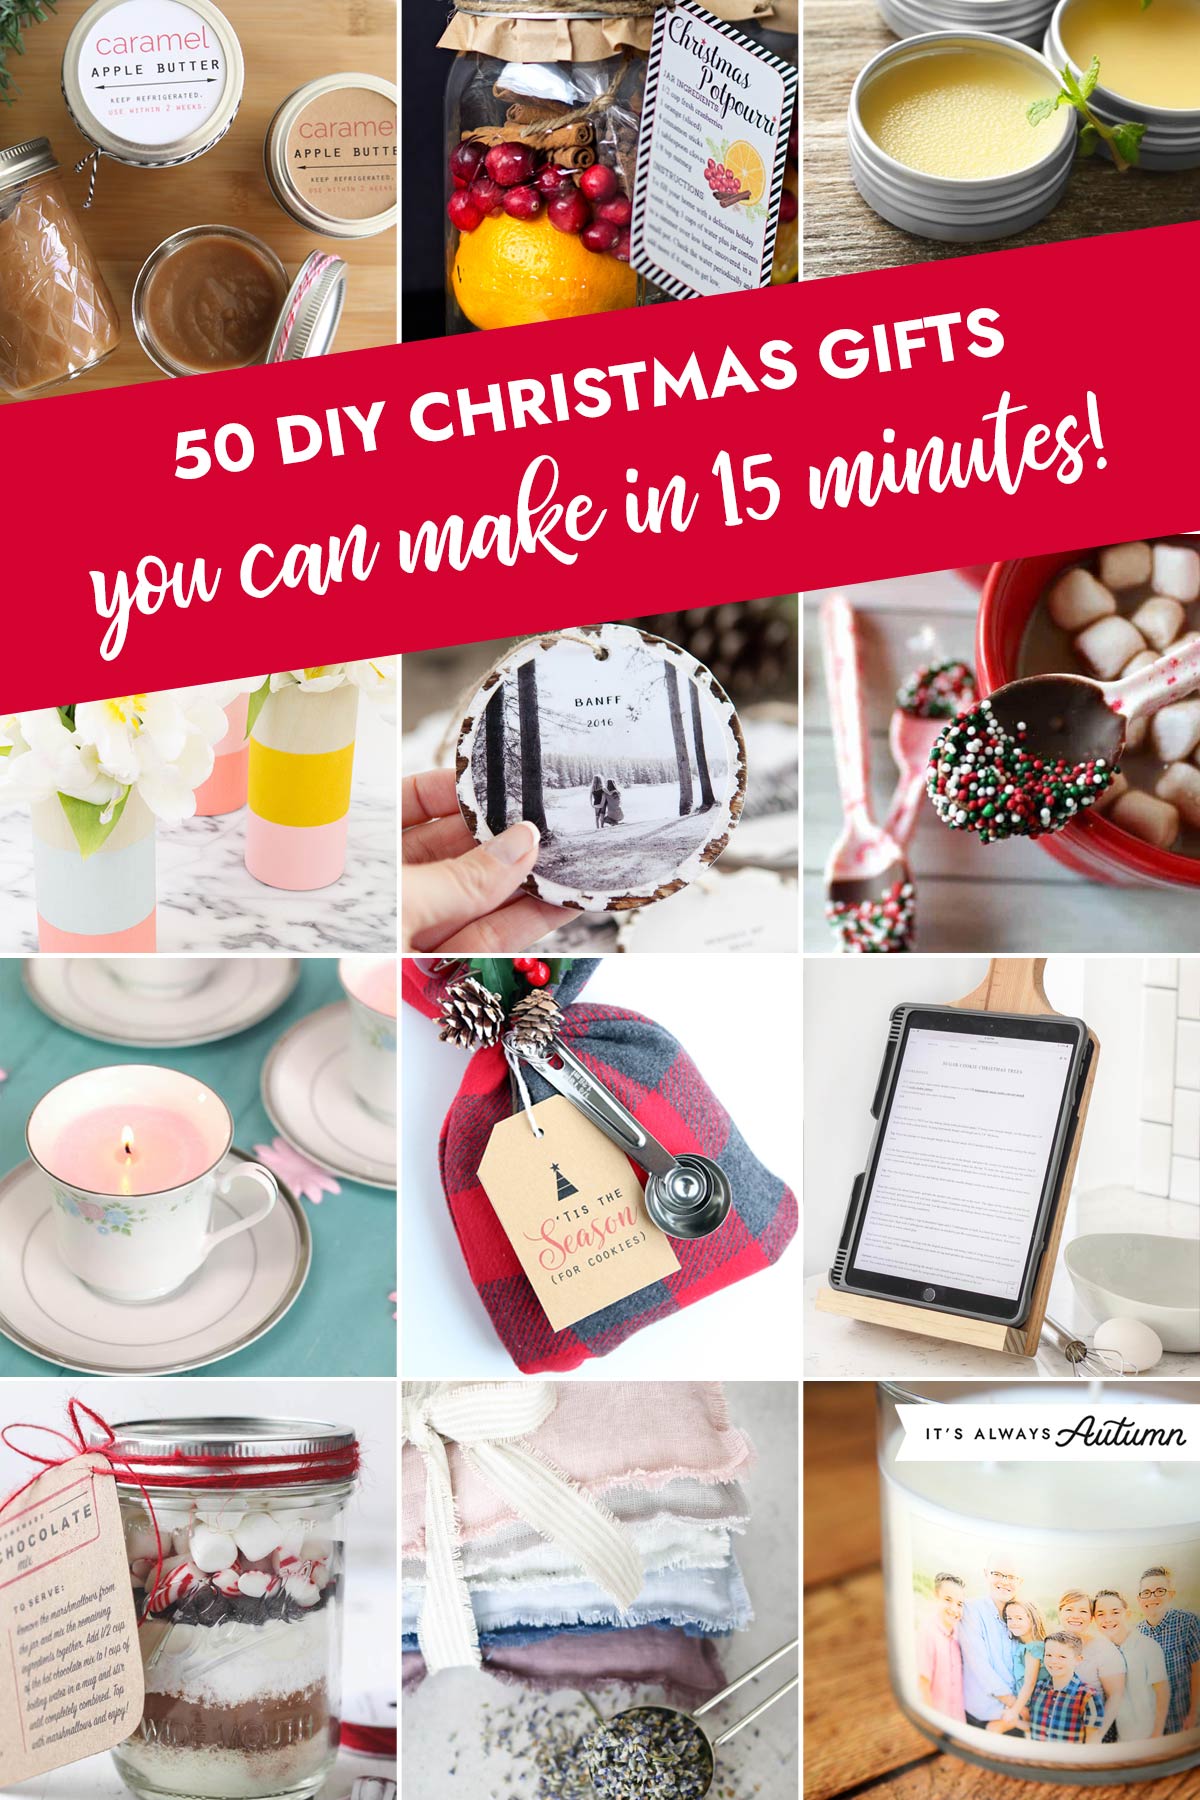 37 DIY Homemade Christmas Gifts - Noshing With the Nolands